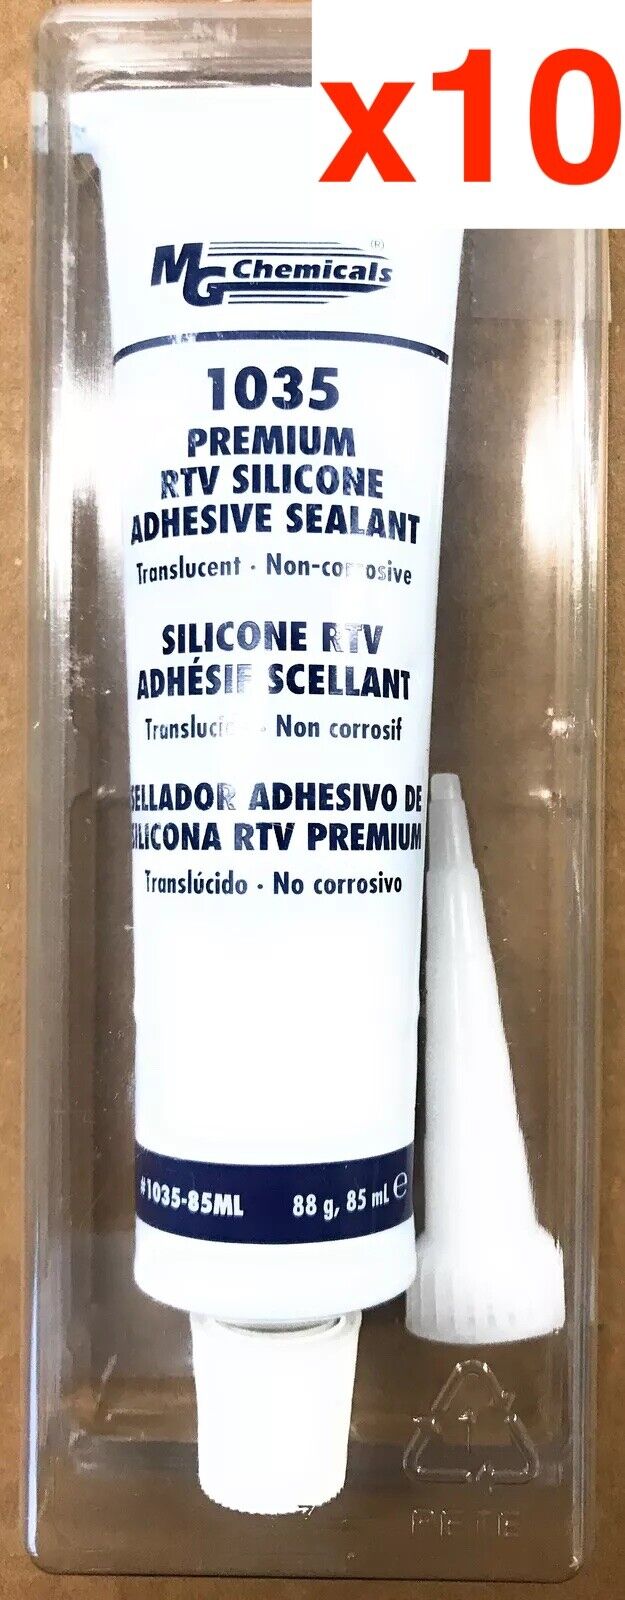 Lot of 10 MG Chemicals 1035 Non Corrosive Translucent Silicone Adhesive Sealant